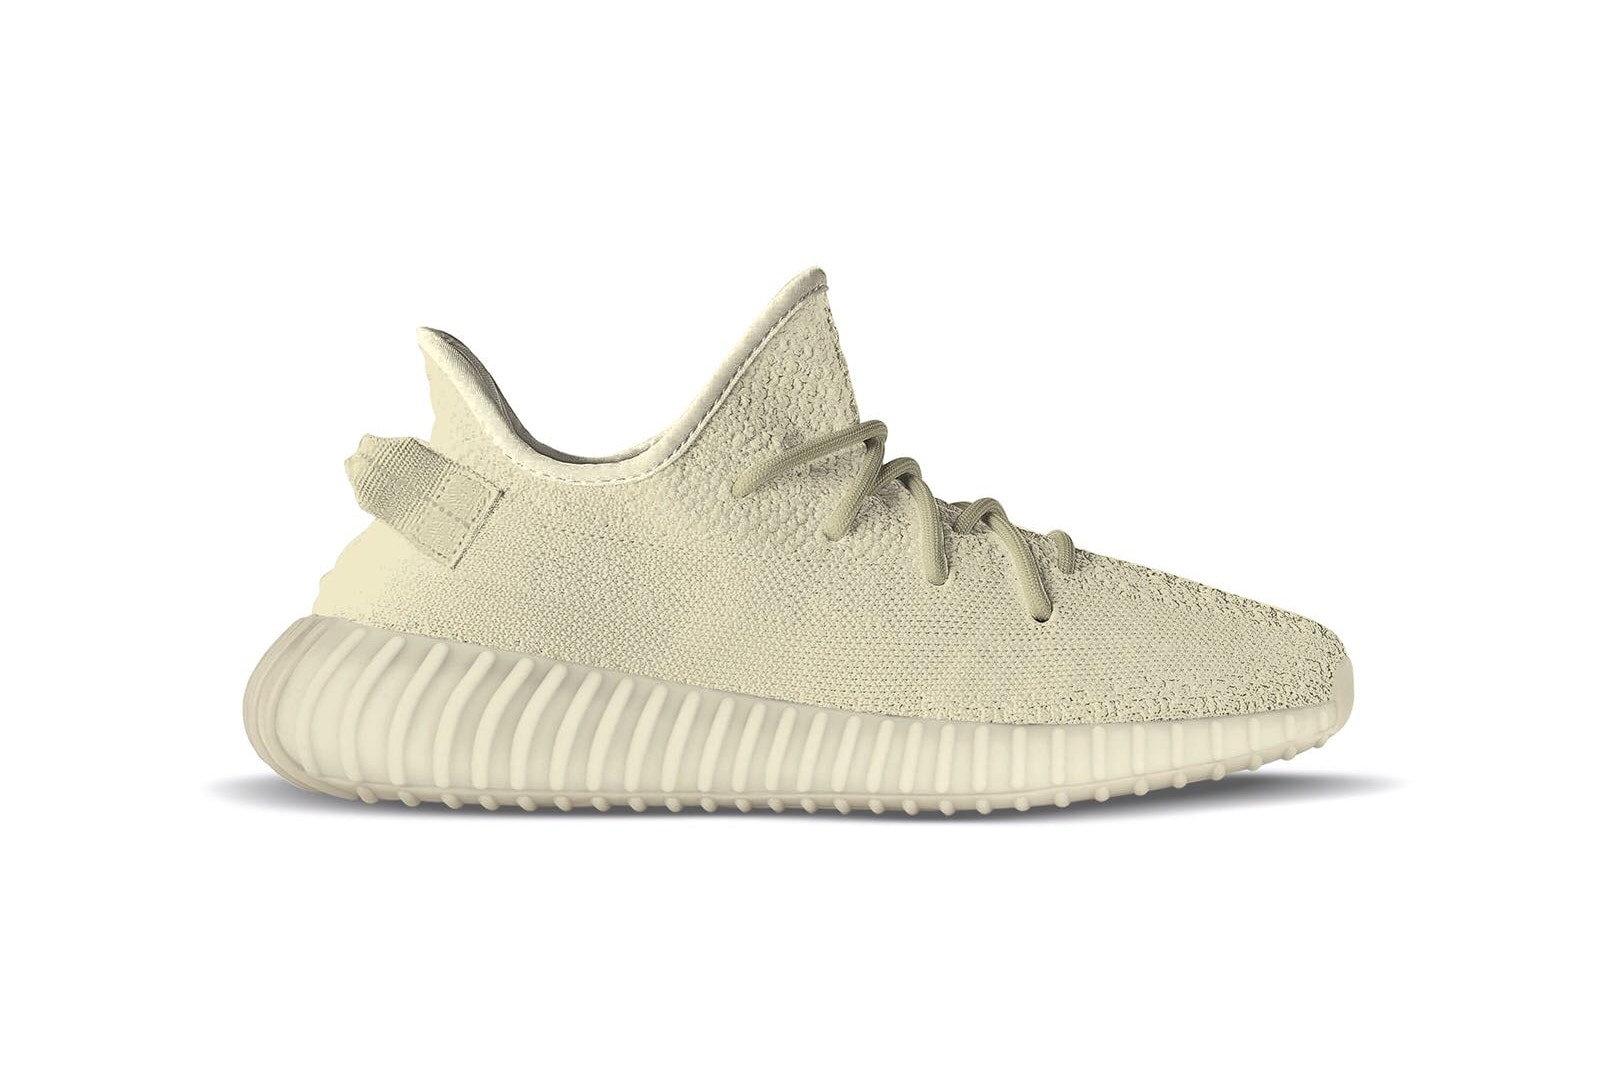 adidas Originals YEEZY BOOST 350 V2 Surfaces "Butter" Kanye West Sneaker Shoe Release Date